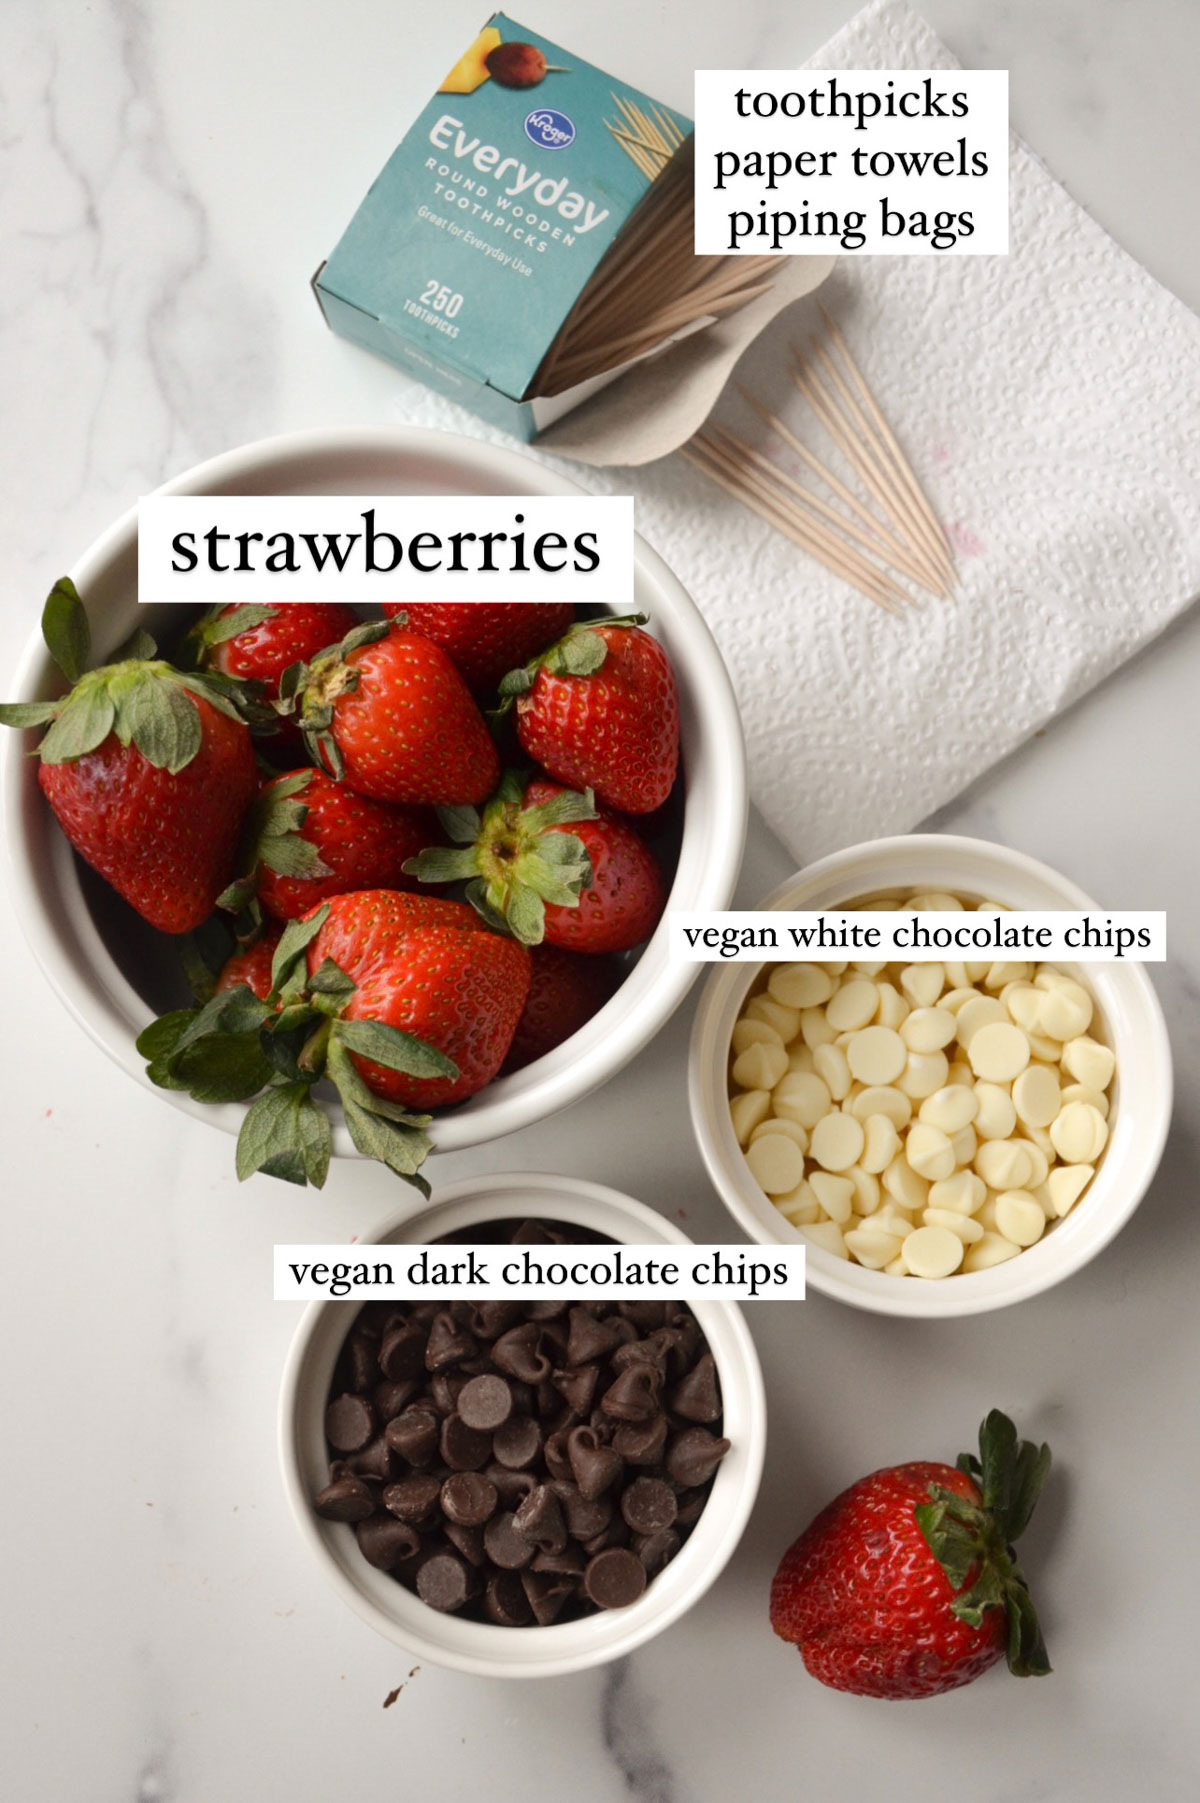 ingredients for making a vegan chocolate covered strawberries recipe